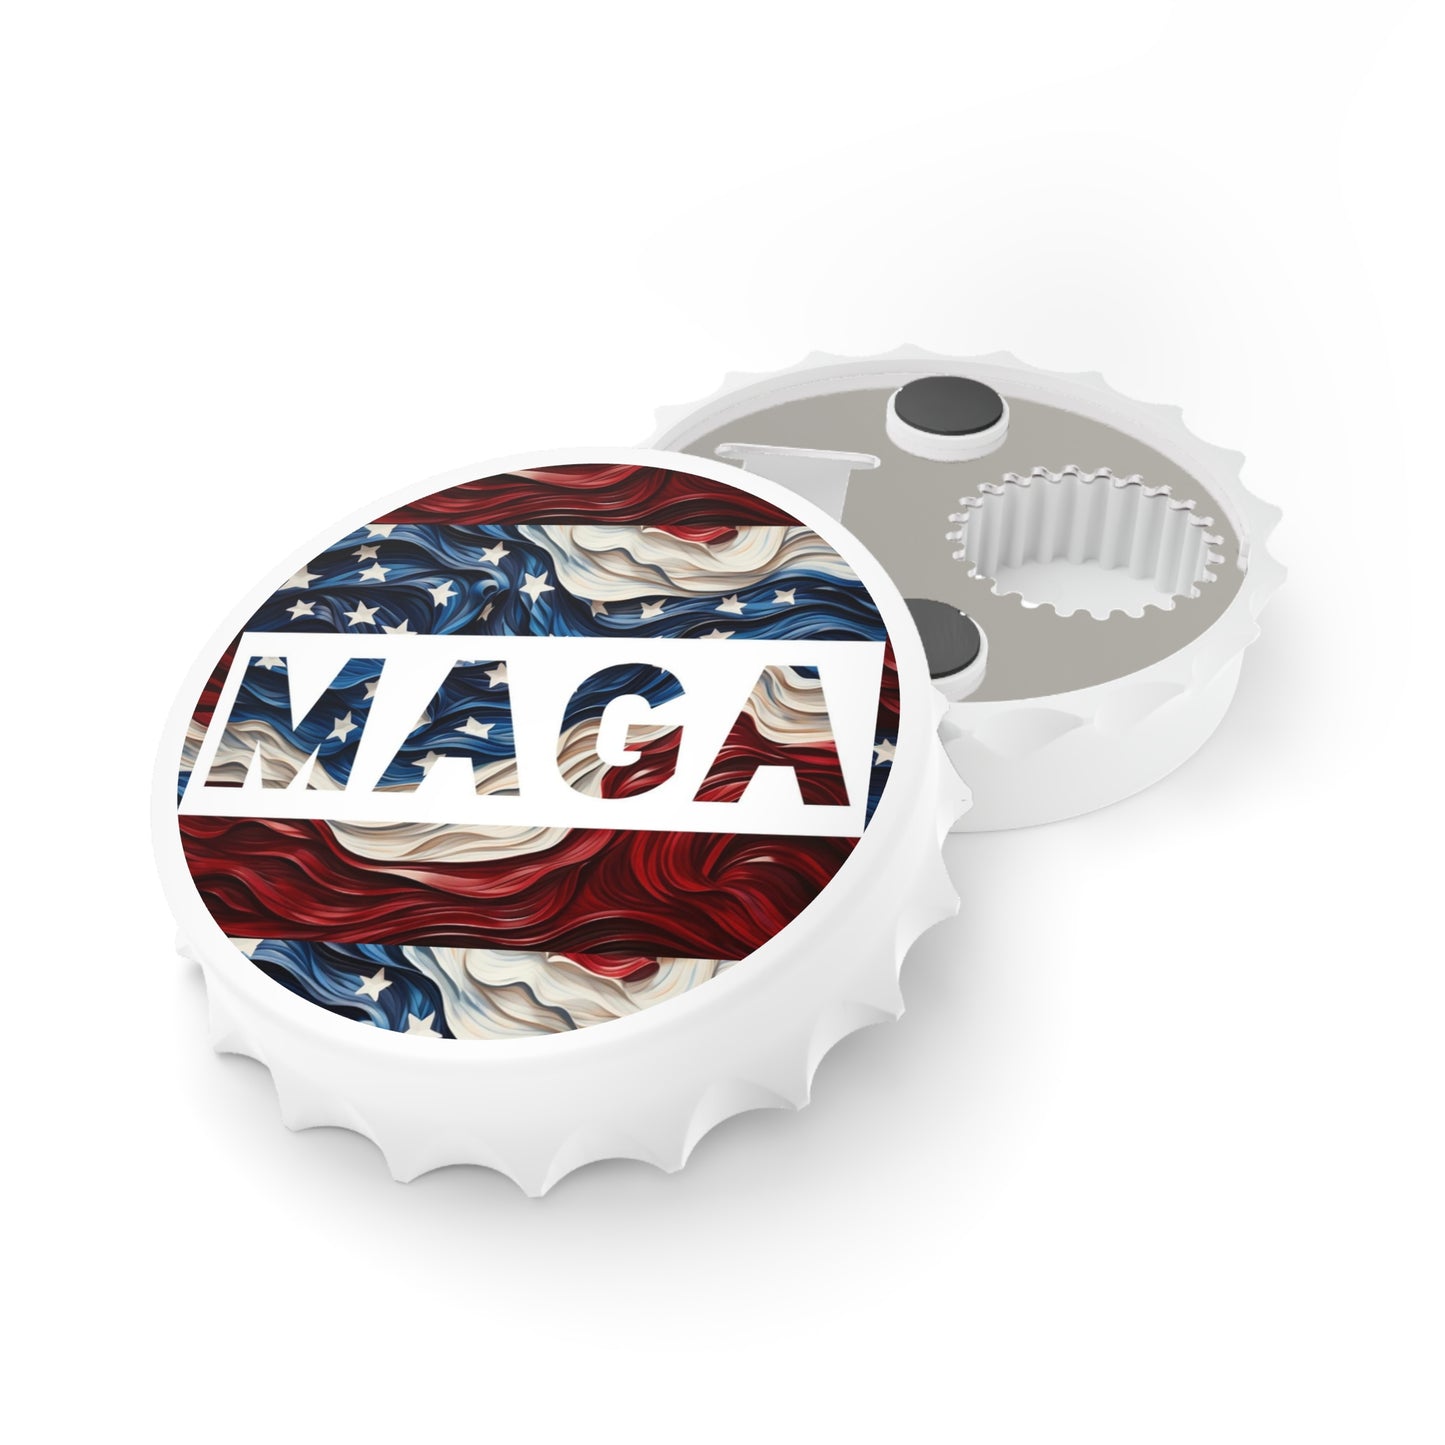 MAGA Red White and Blue America Trump Bottle and Can Opener